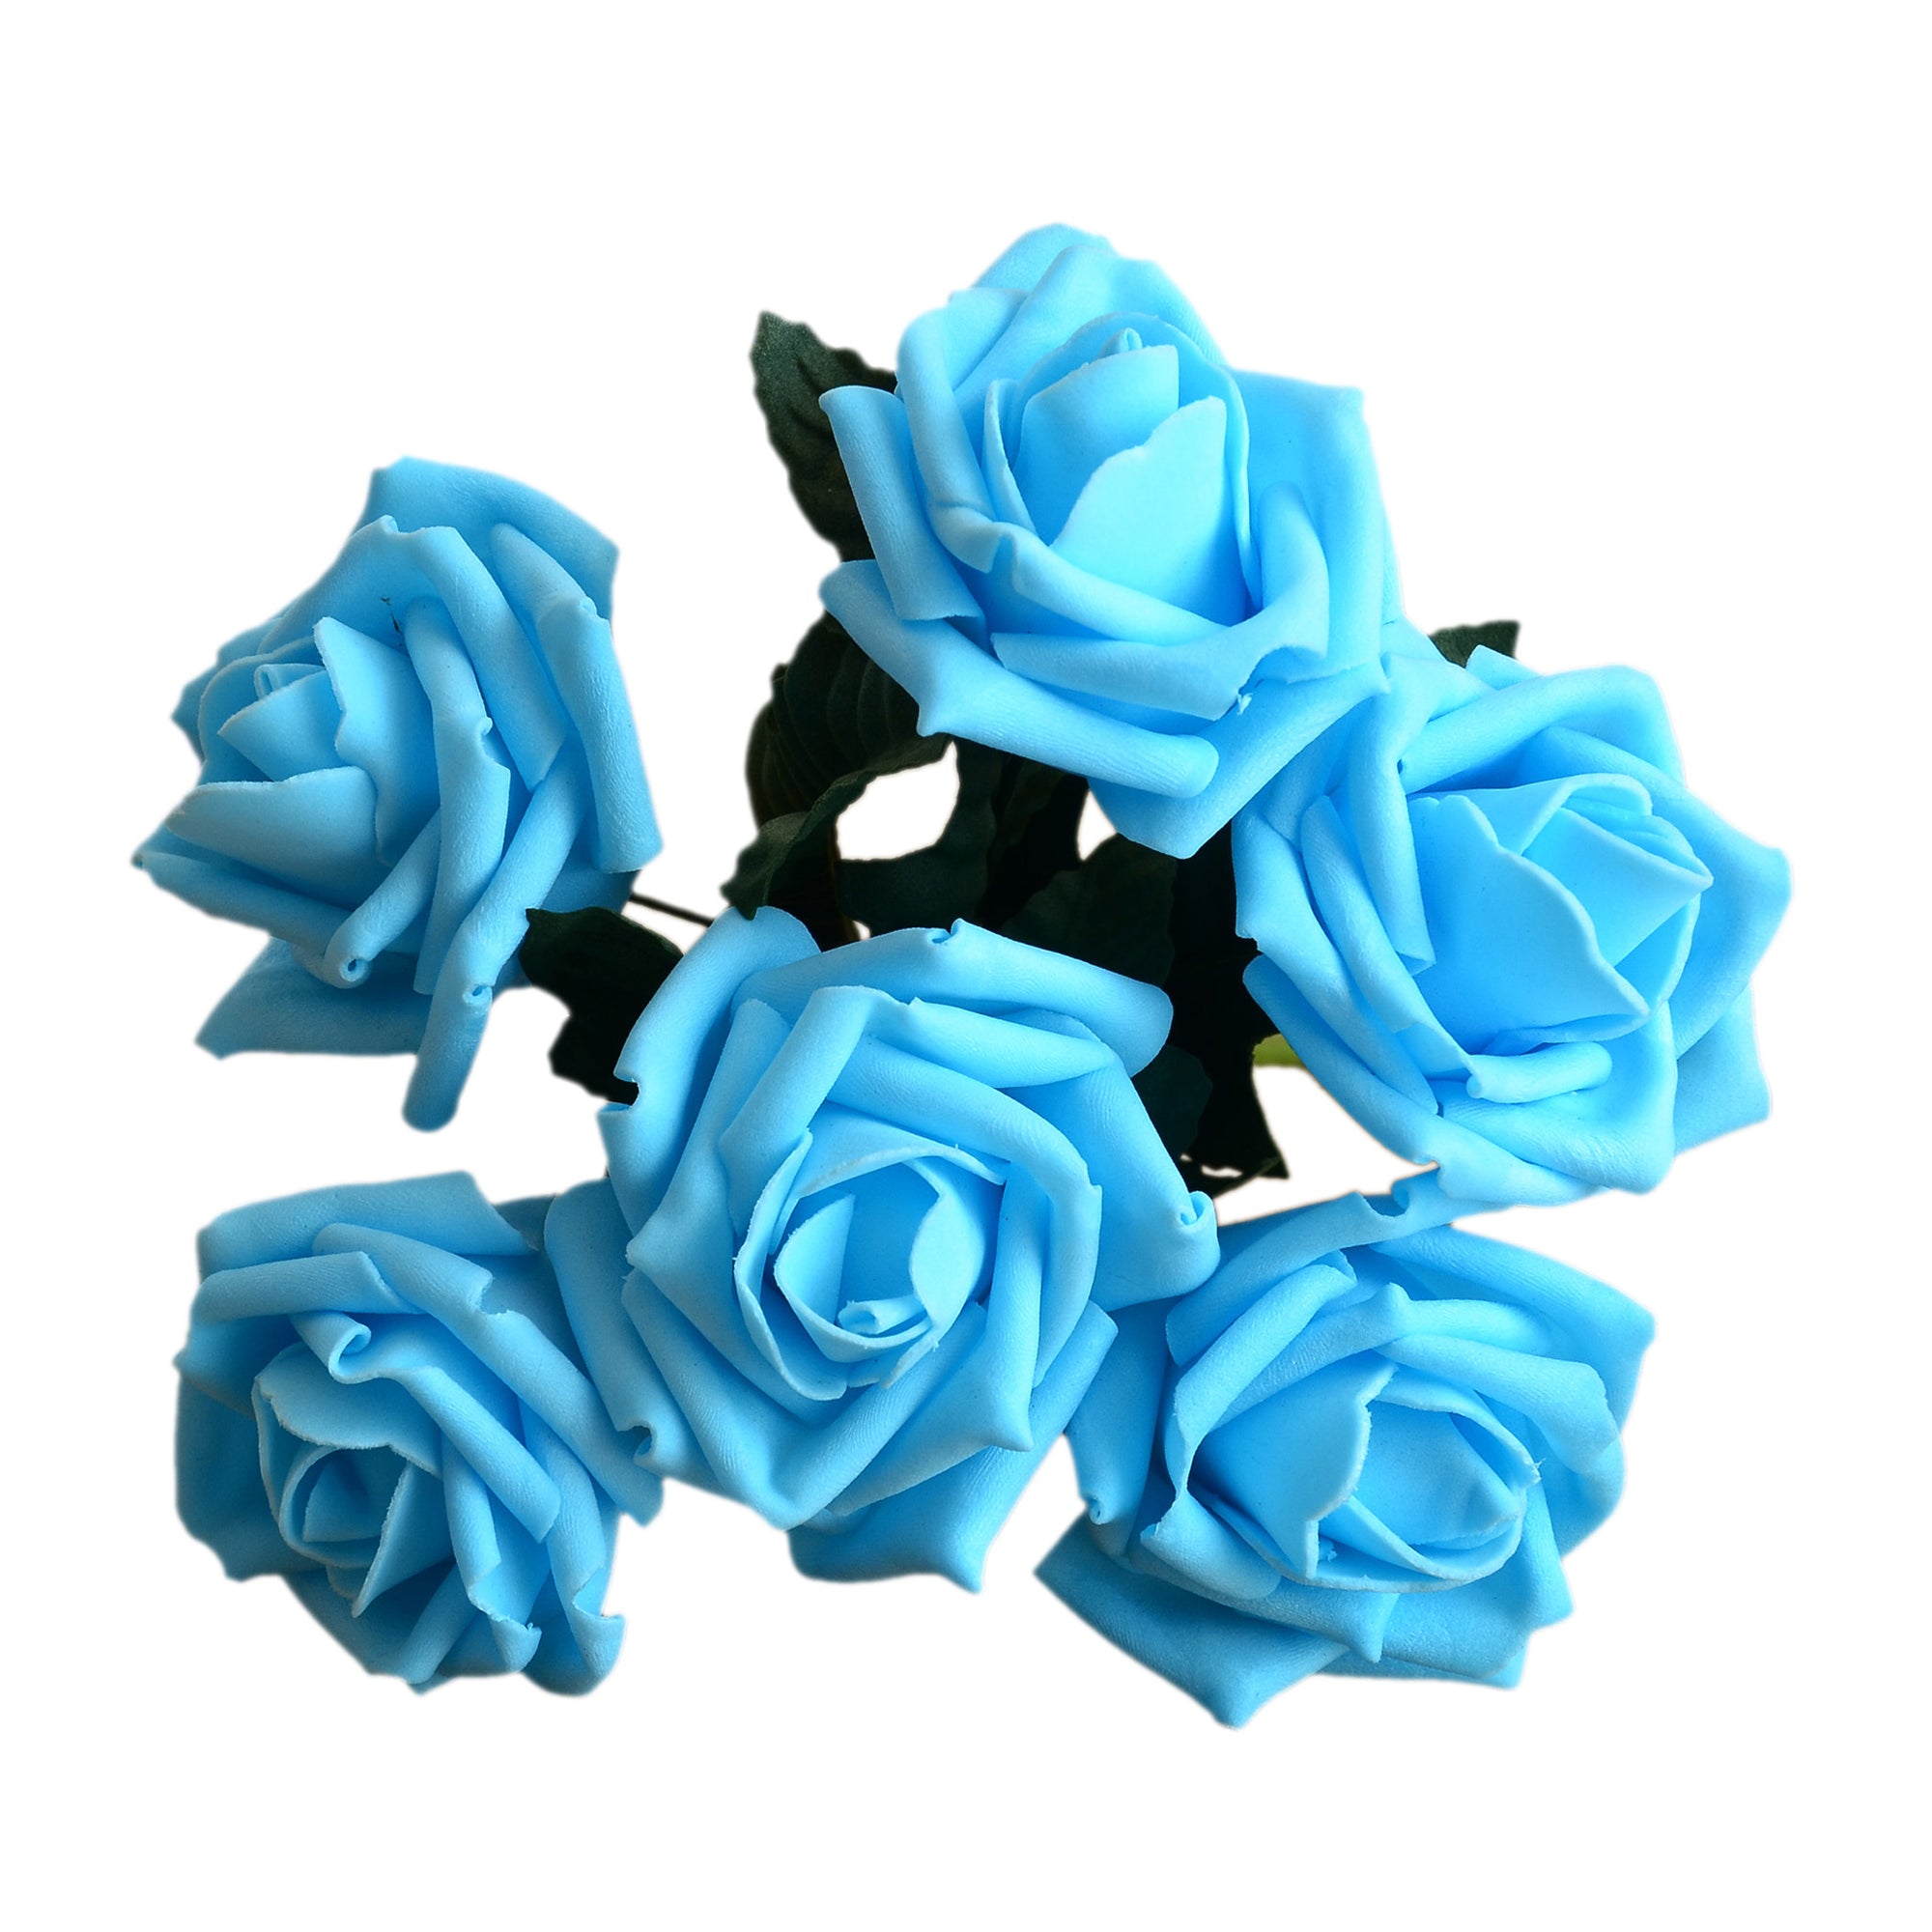 Turquoise Blue Roses Wedding Flowers Artificial Flowers